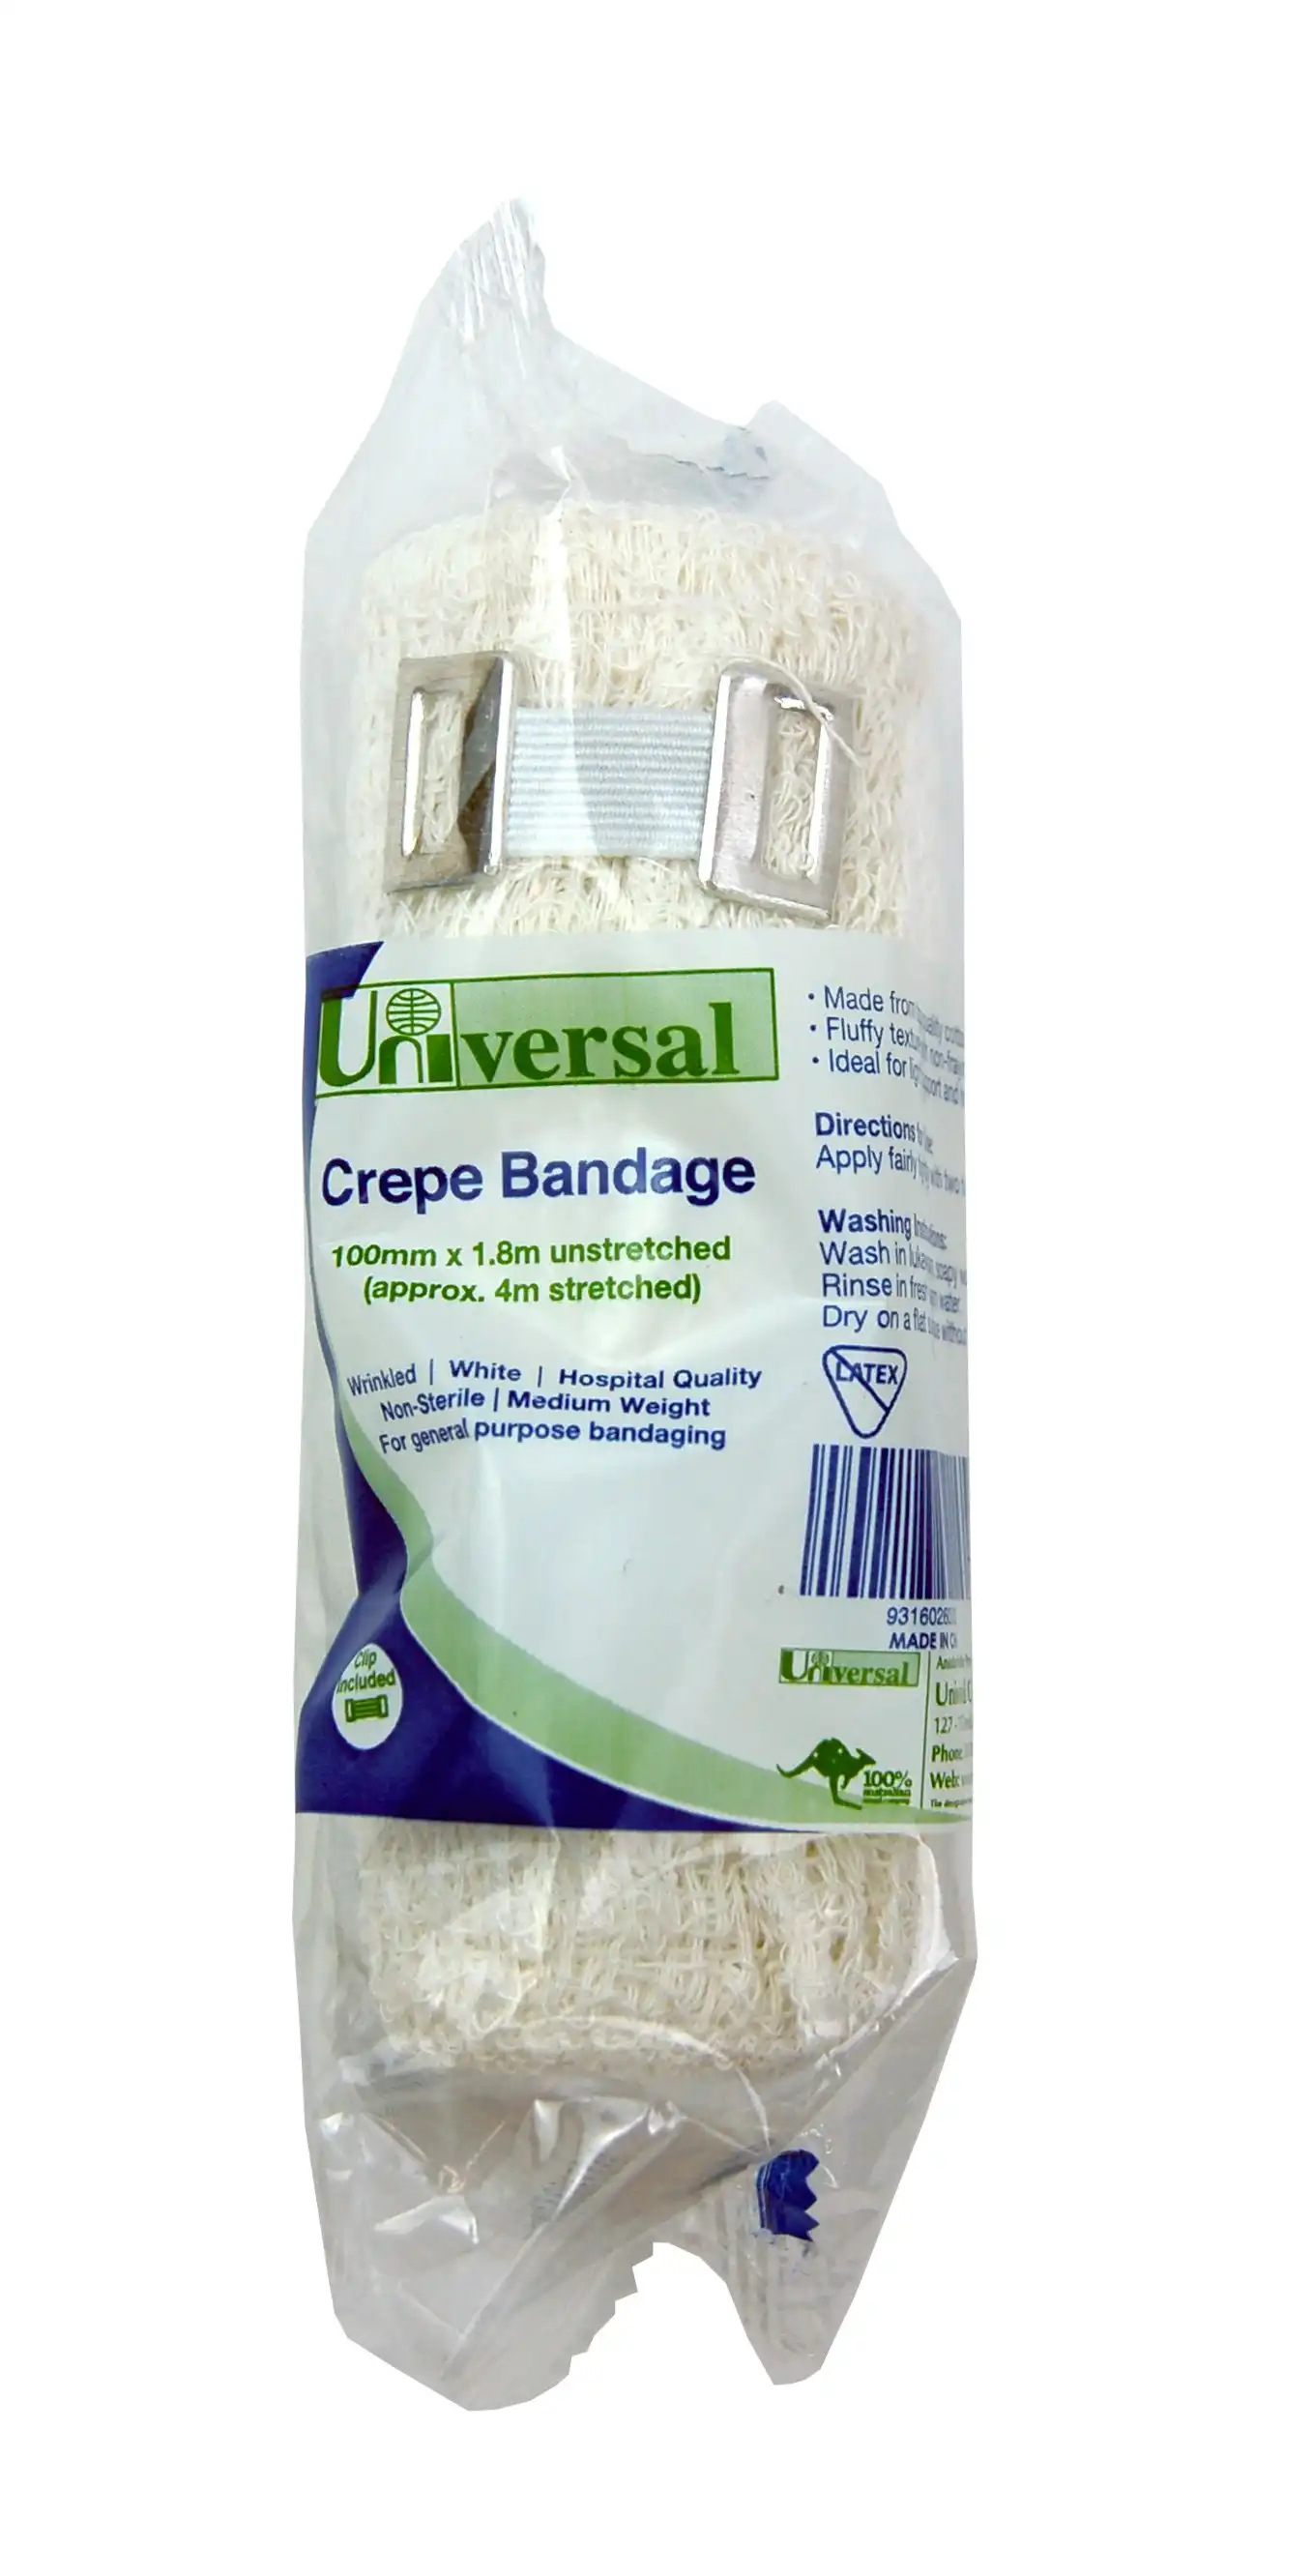 Universal Crepe Bandage Medium Weight 10cm x 1.8m Unstretched 4m Stretched Wrinkled